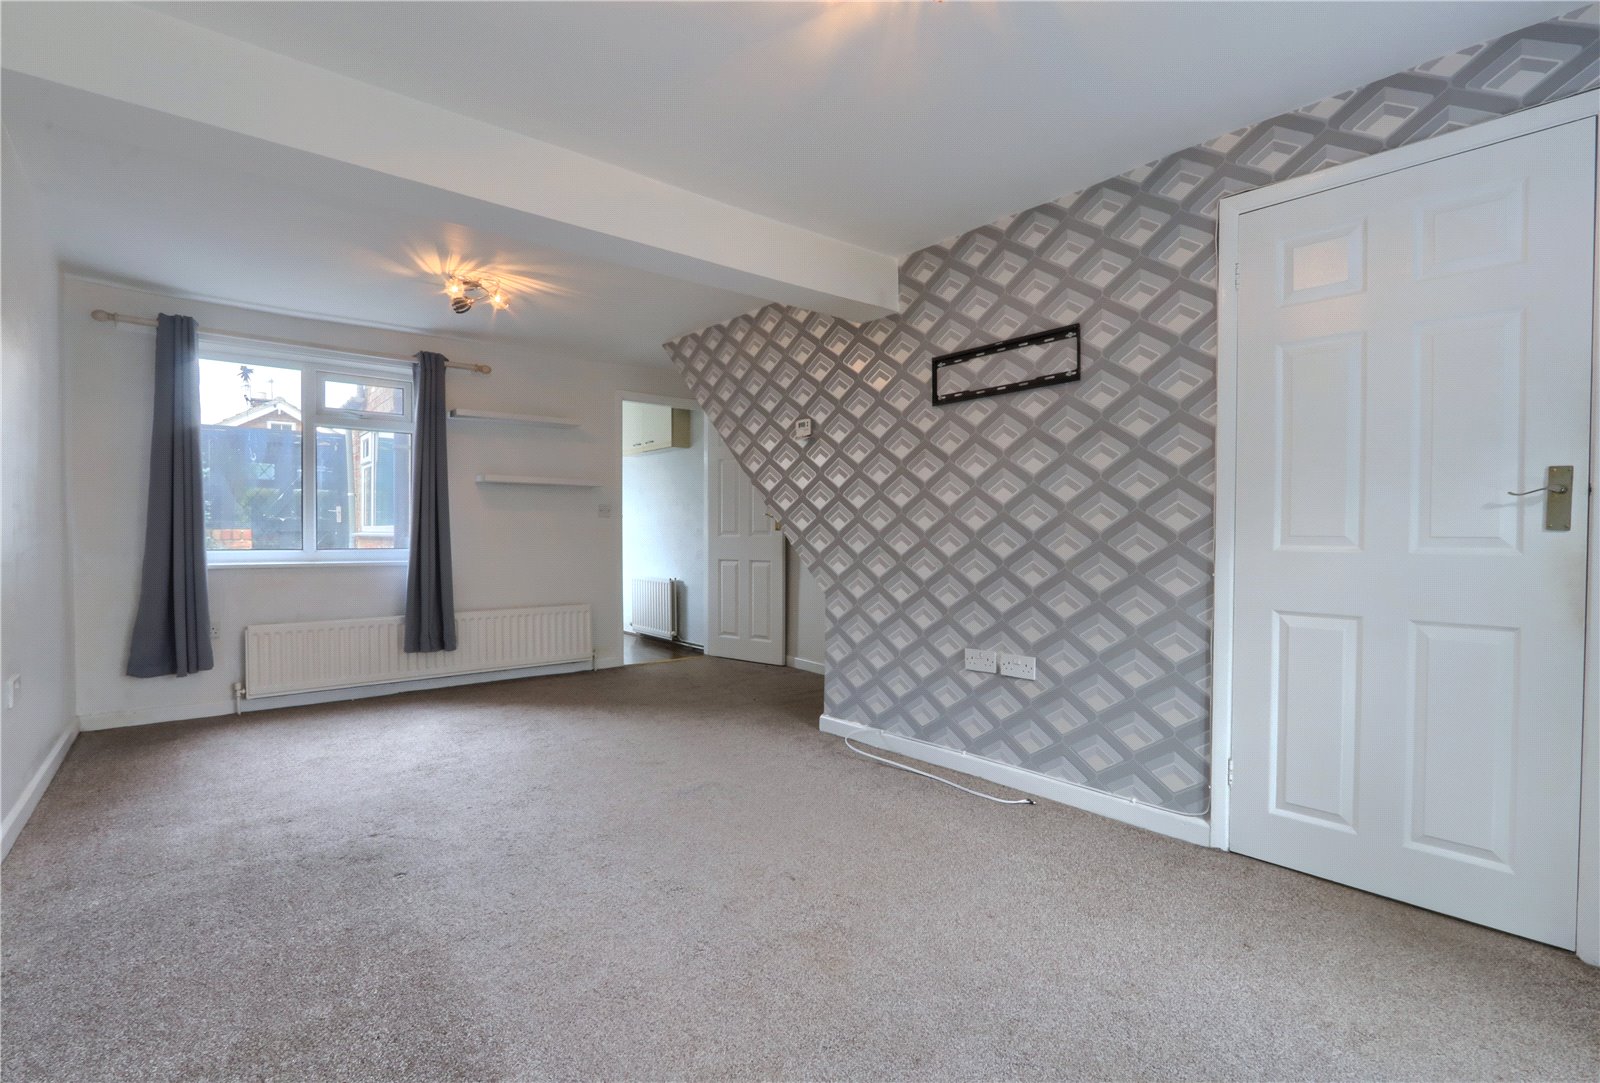 2 bed house for sale in High Street, Normanby 1